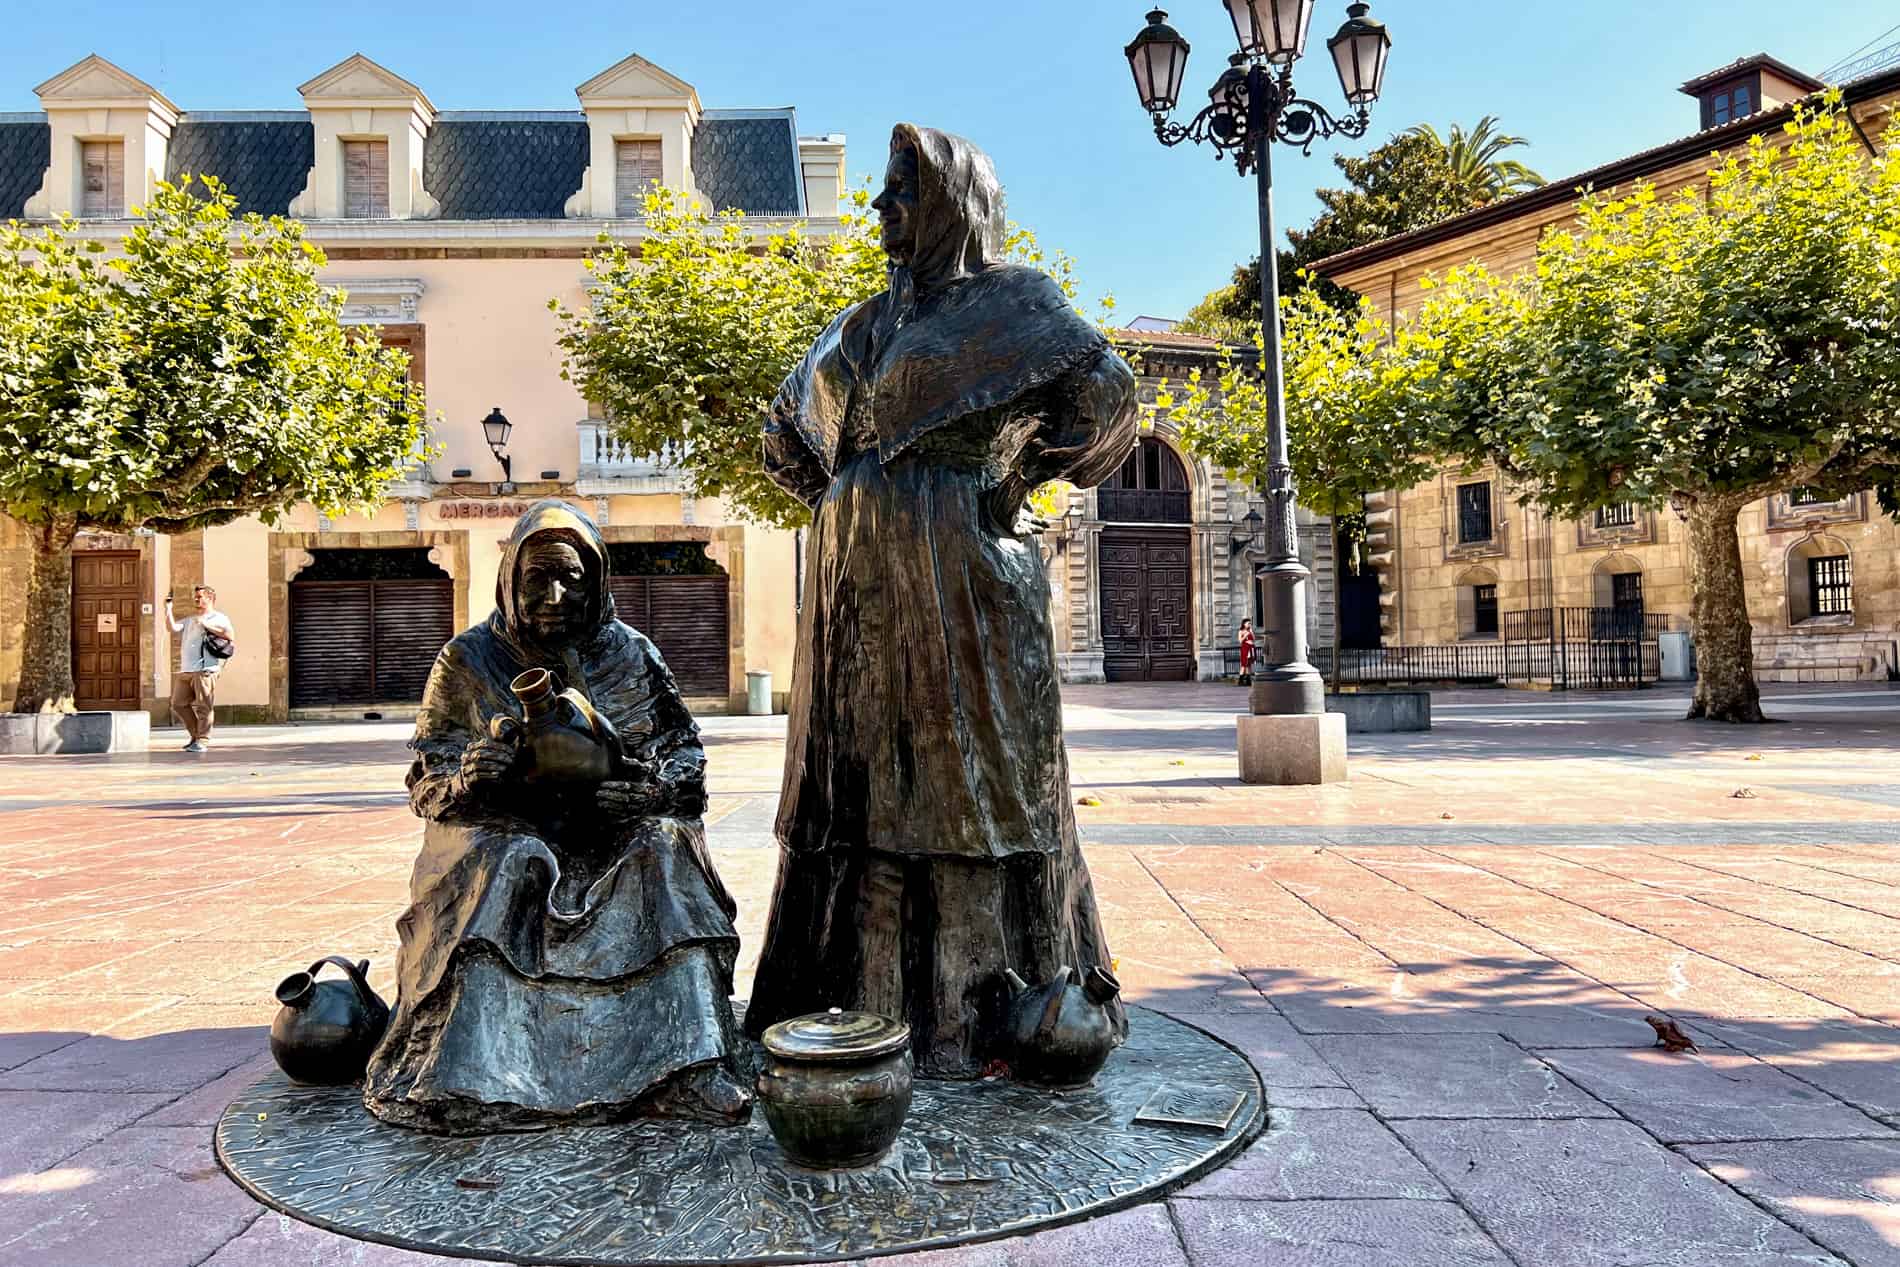 The ‘Las Vendedoras del Fontán’ statue in Oviedo is of two female market sellers, standing within the pretty, tree-lined Fontán square. 